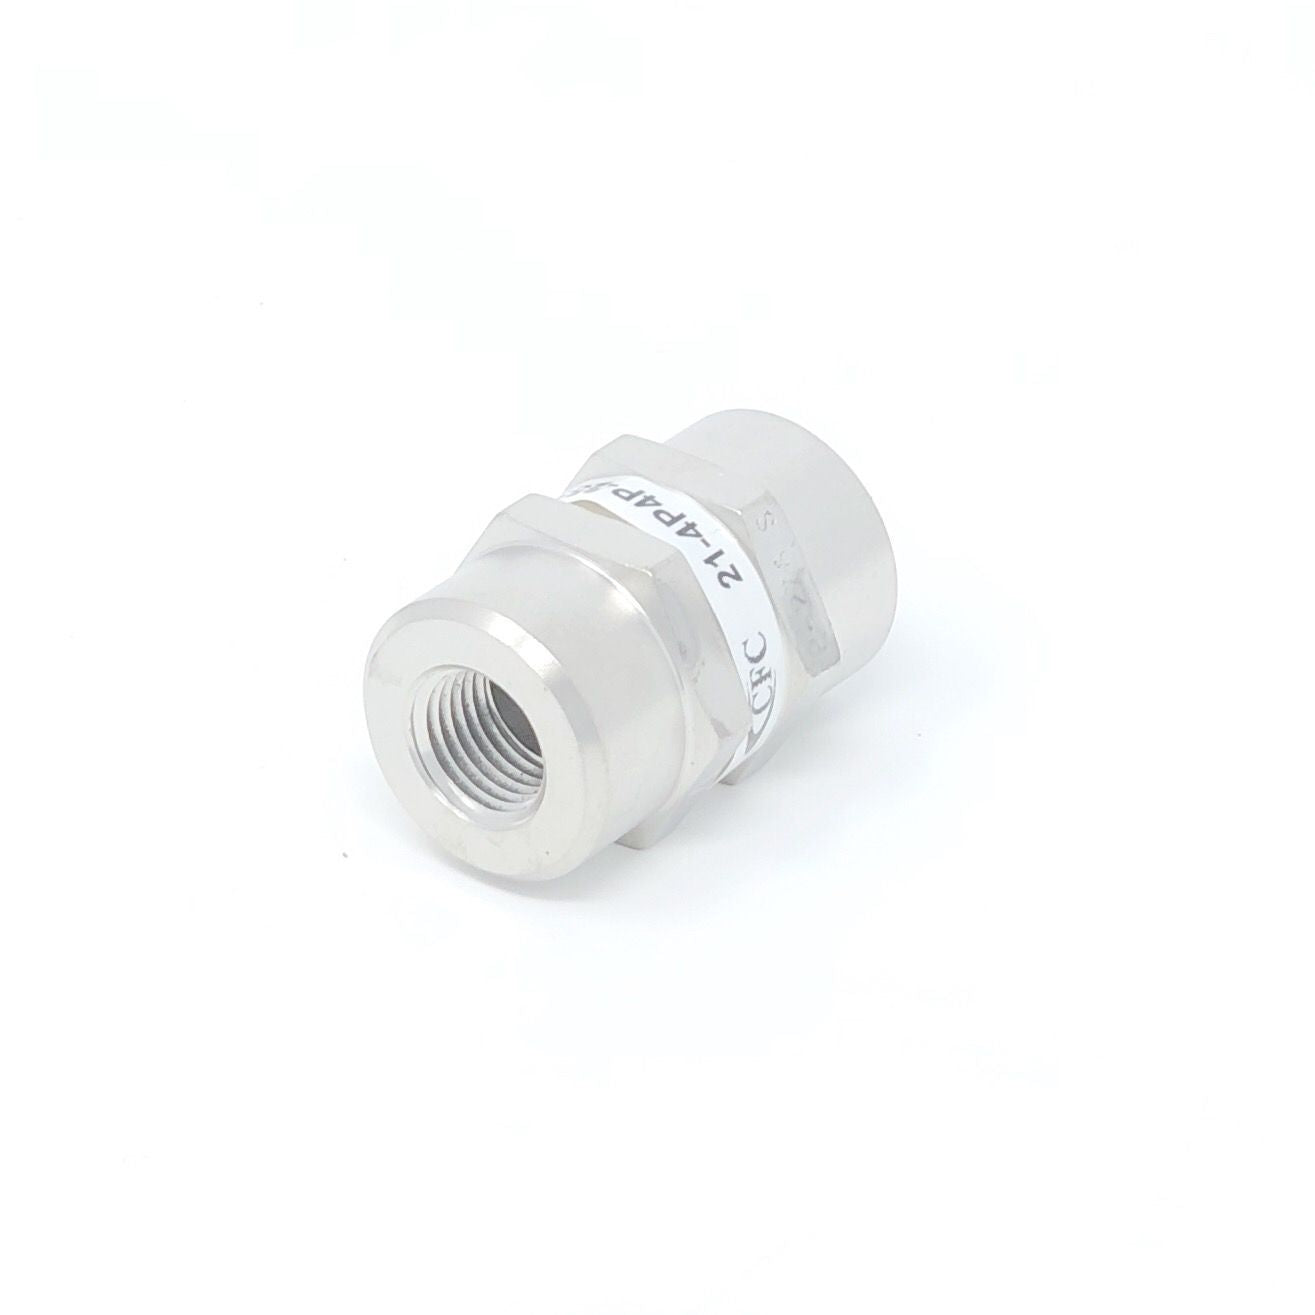 21-12N12N-10S : Chase High Pressure Inline Filter, 3000psi, 3/4" NPT, 10 Micron, No Visual Indicator, No Bypass